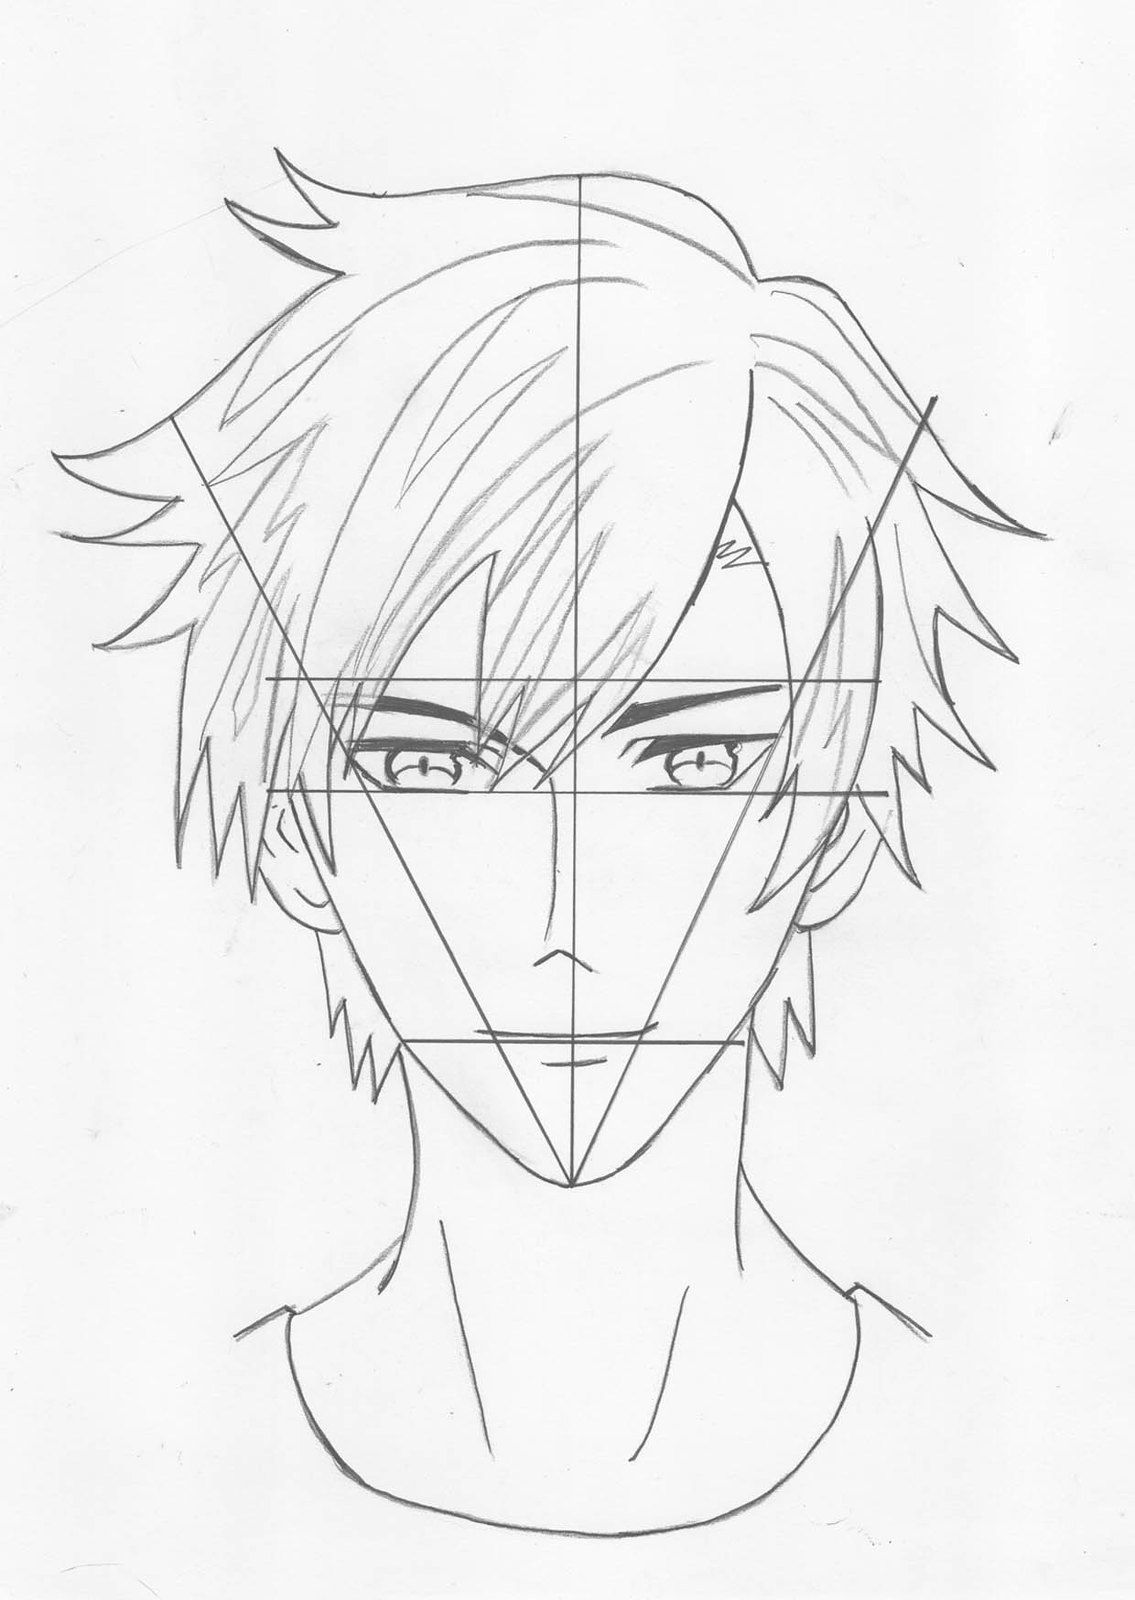 How To Draw Anime Boy Face Step By Step For Beginners ...